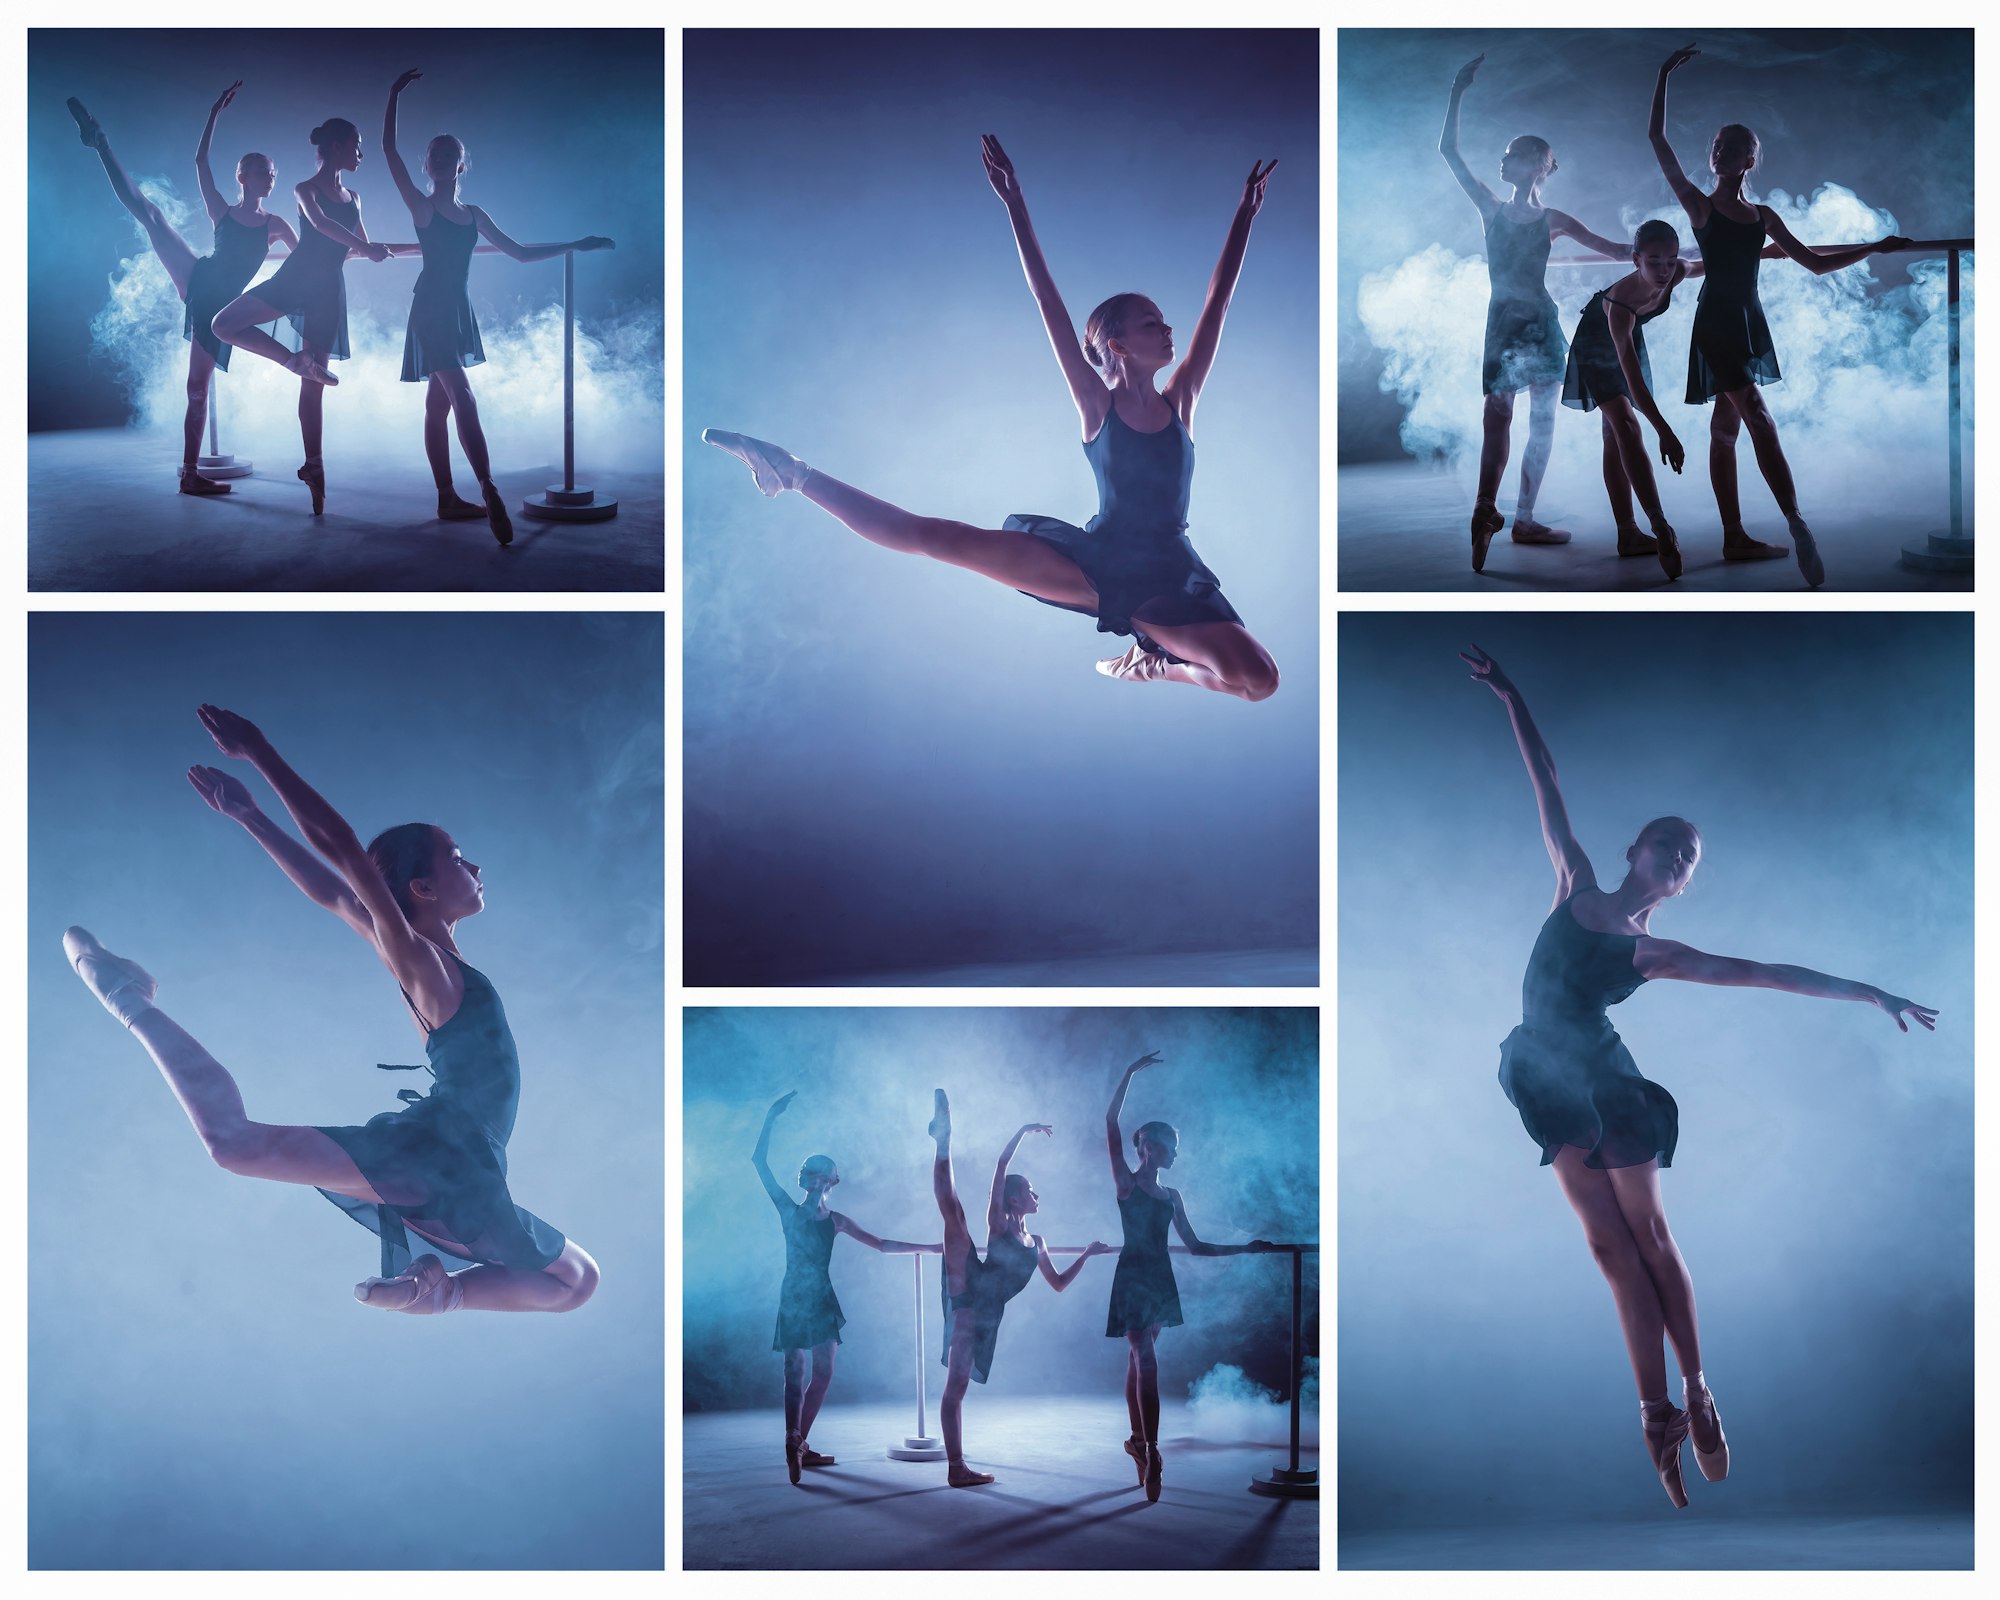 The collage from images of young ballerinas stretching on the bar